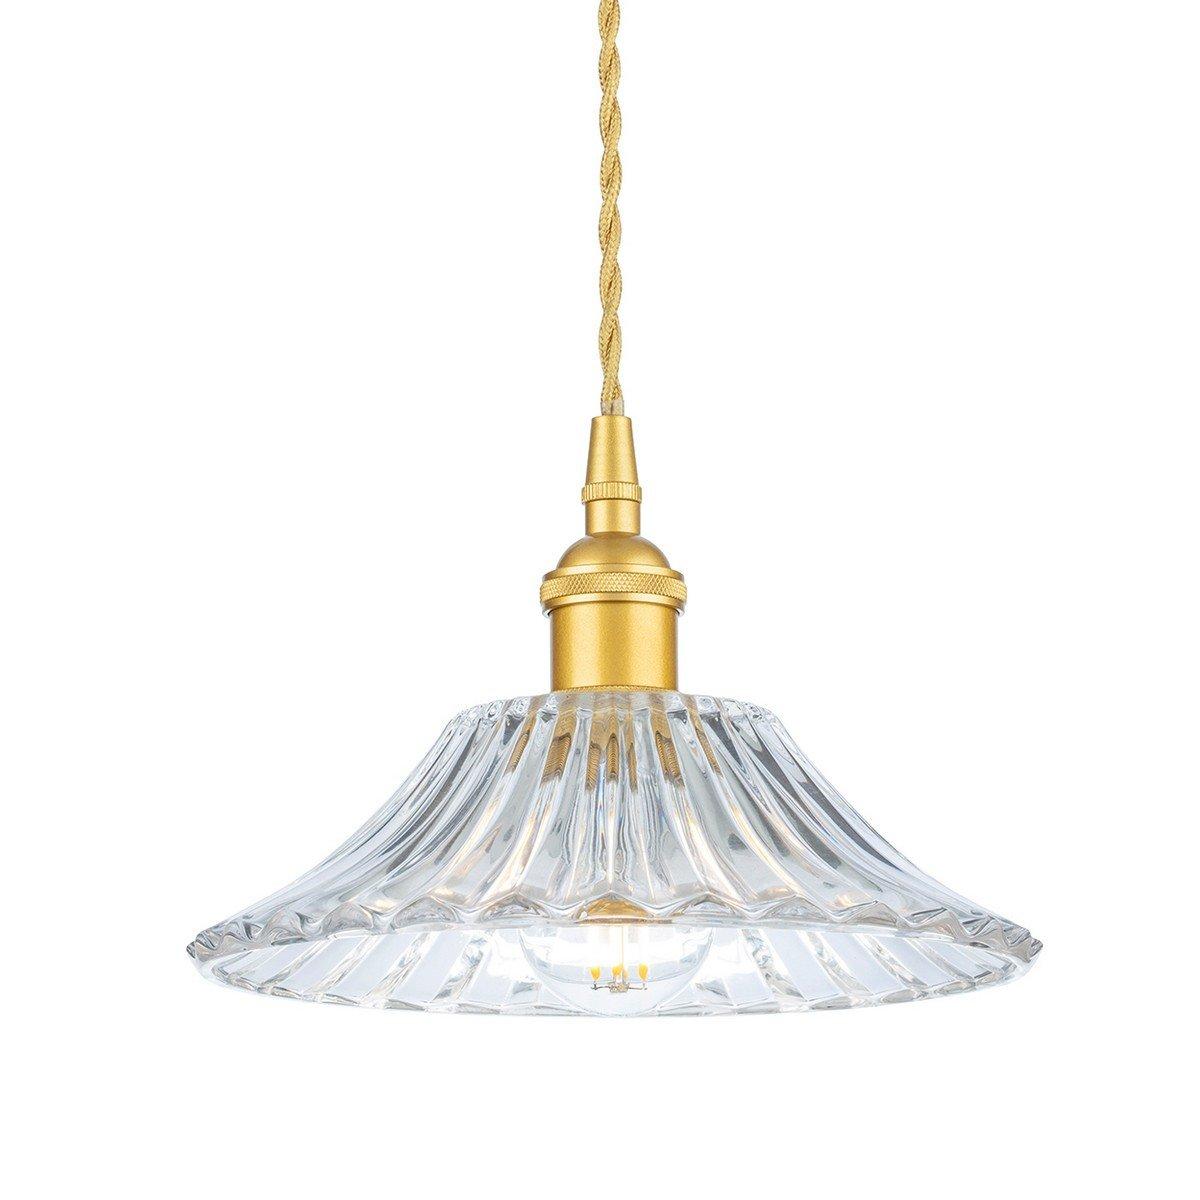 Wilshire Dome Pendant Light Satin Gold with Decorative Glass